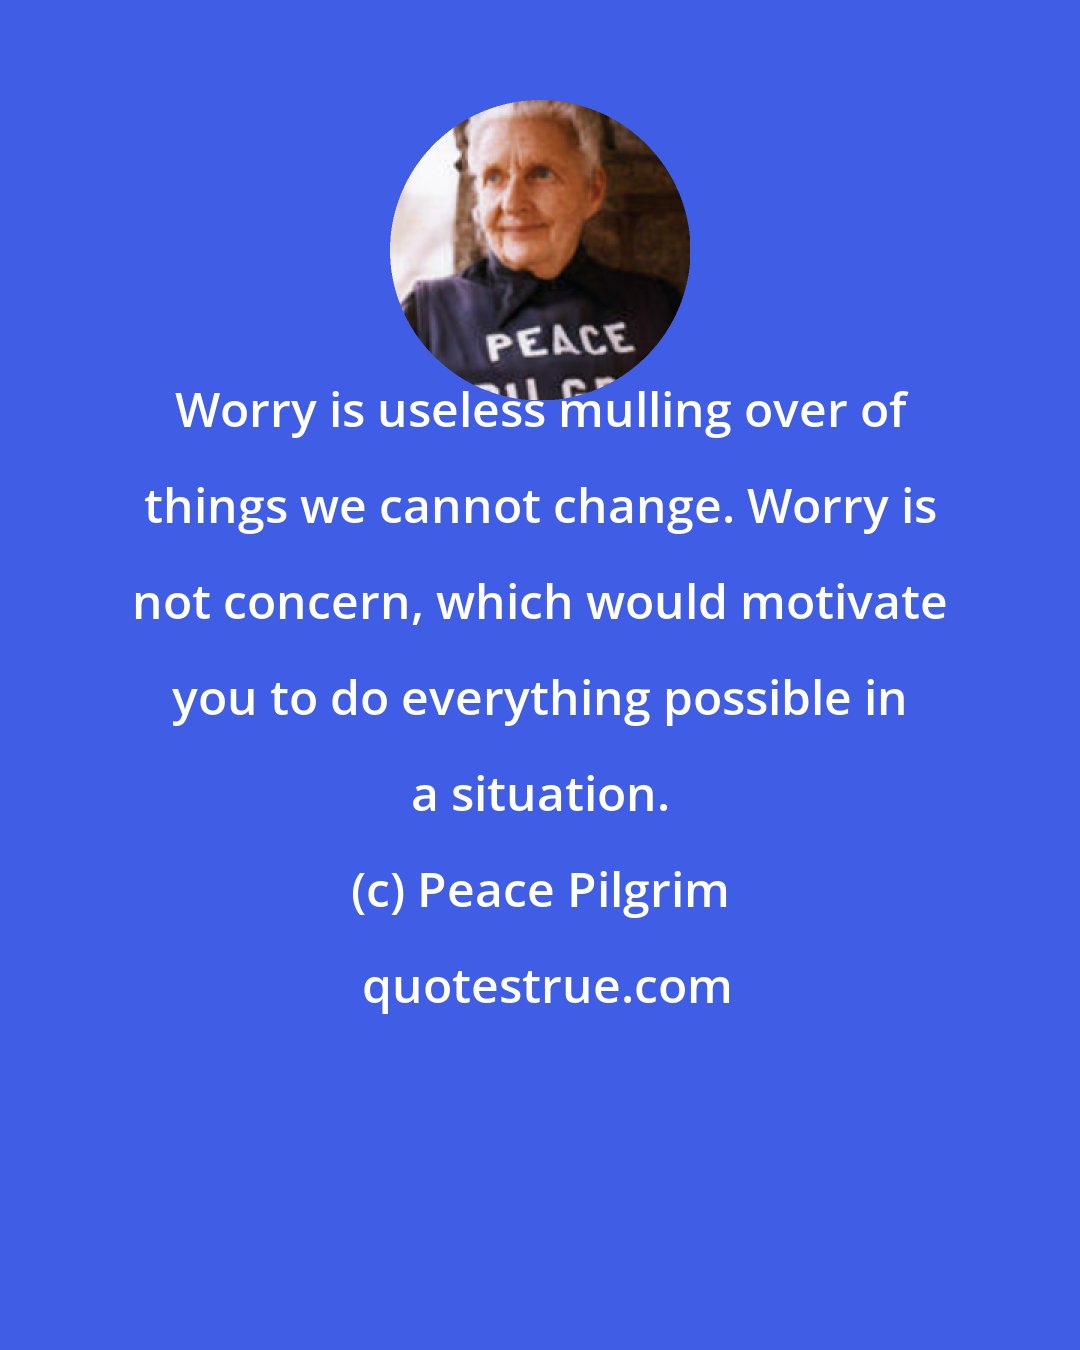 Peace Pilgrim: Worry is useless mulling over of things we cannot change. Worry is not concern, which would motivate you to do everything possible in a situation.